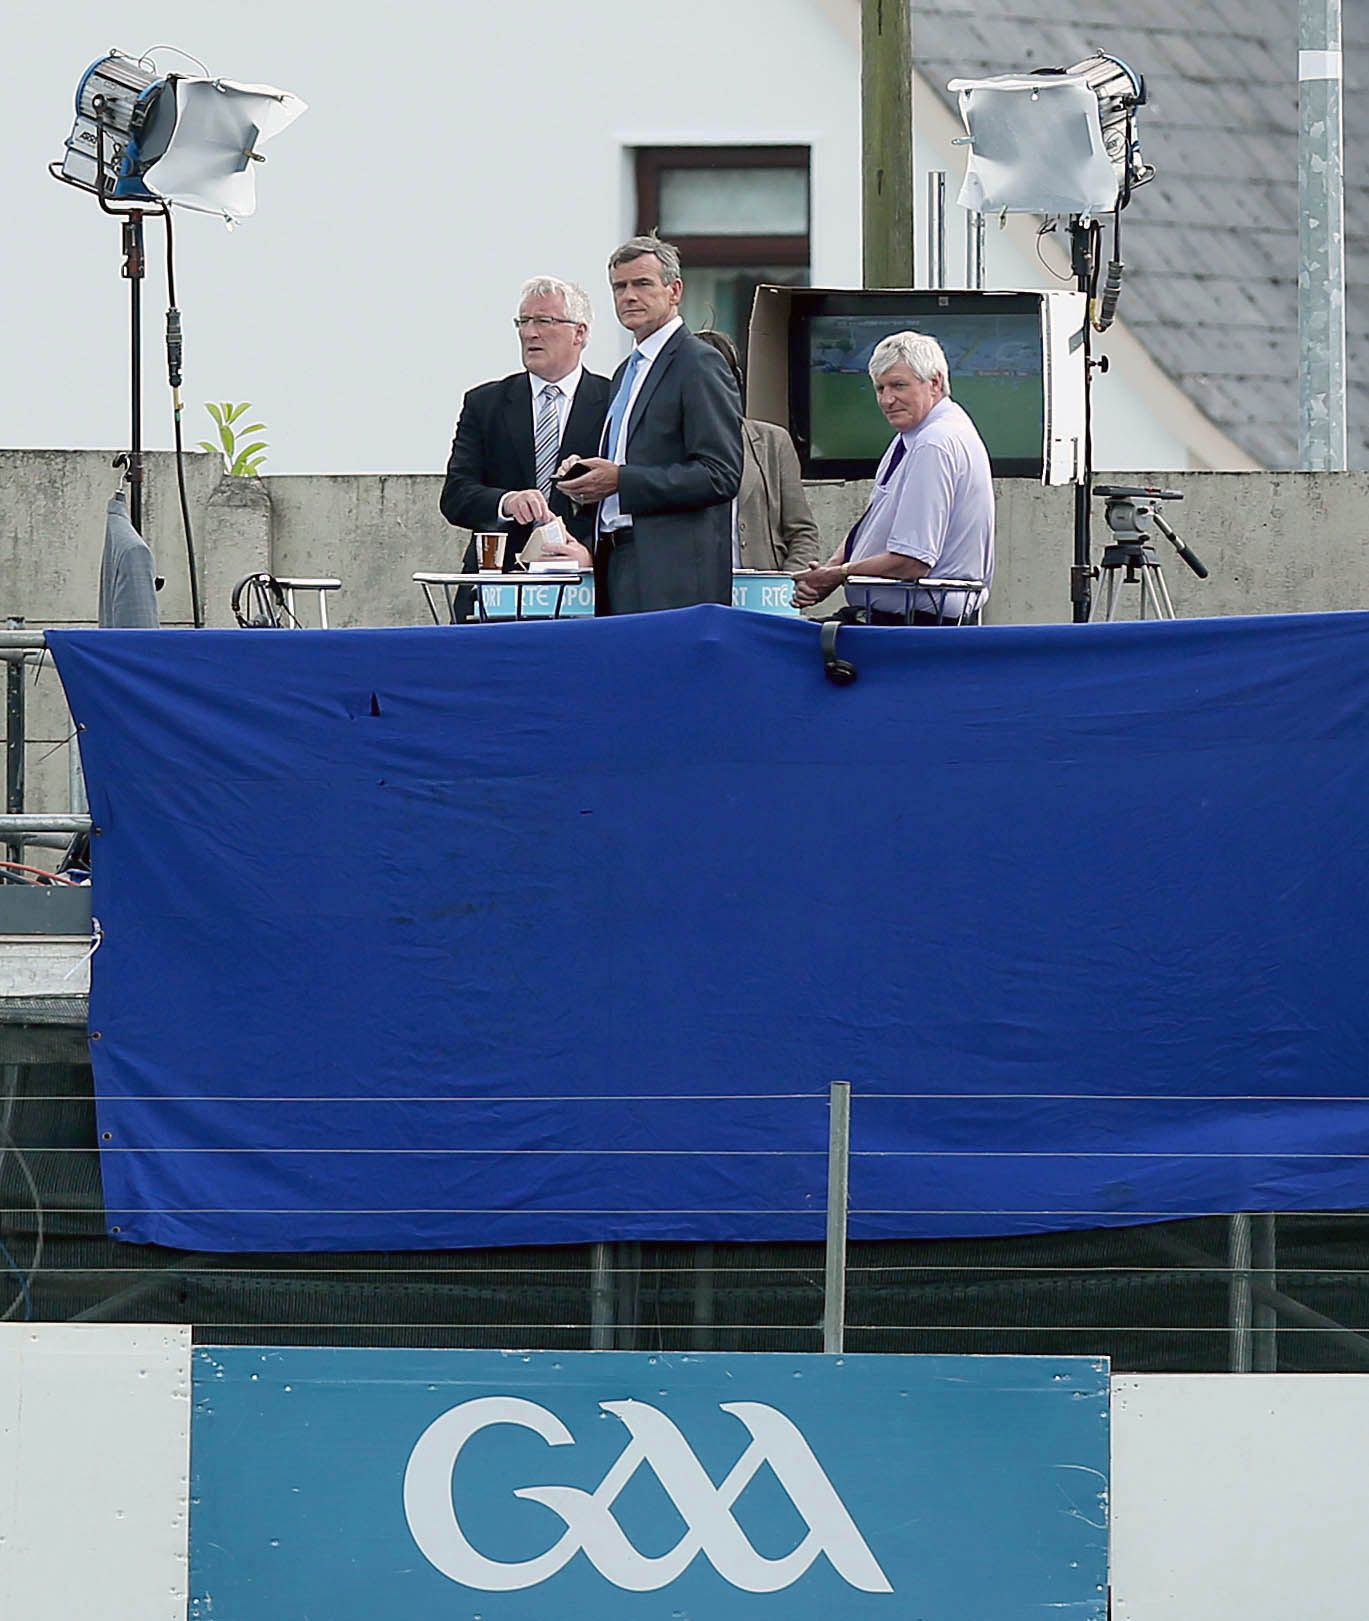 GAA Football All Ireland Senior Championship Qualifier Series Round 1A 21/6/2014 Laois vs Fermanagh The RTE panel of Pat Spillane, Colm O'Rourke and Michael Lyster look on Mandatory Credit ©INPHO/Donall Farmer